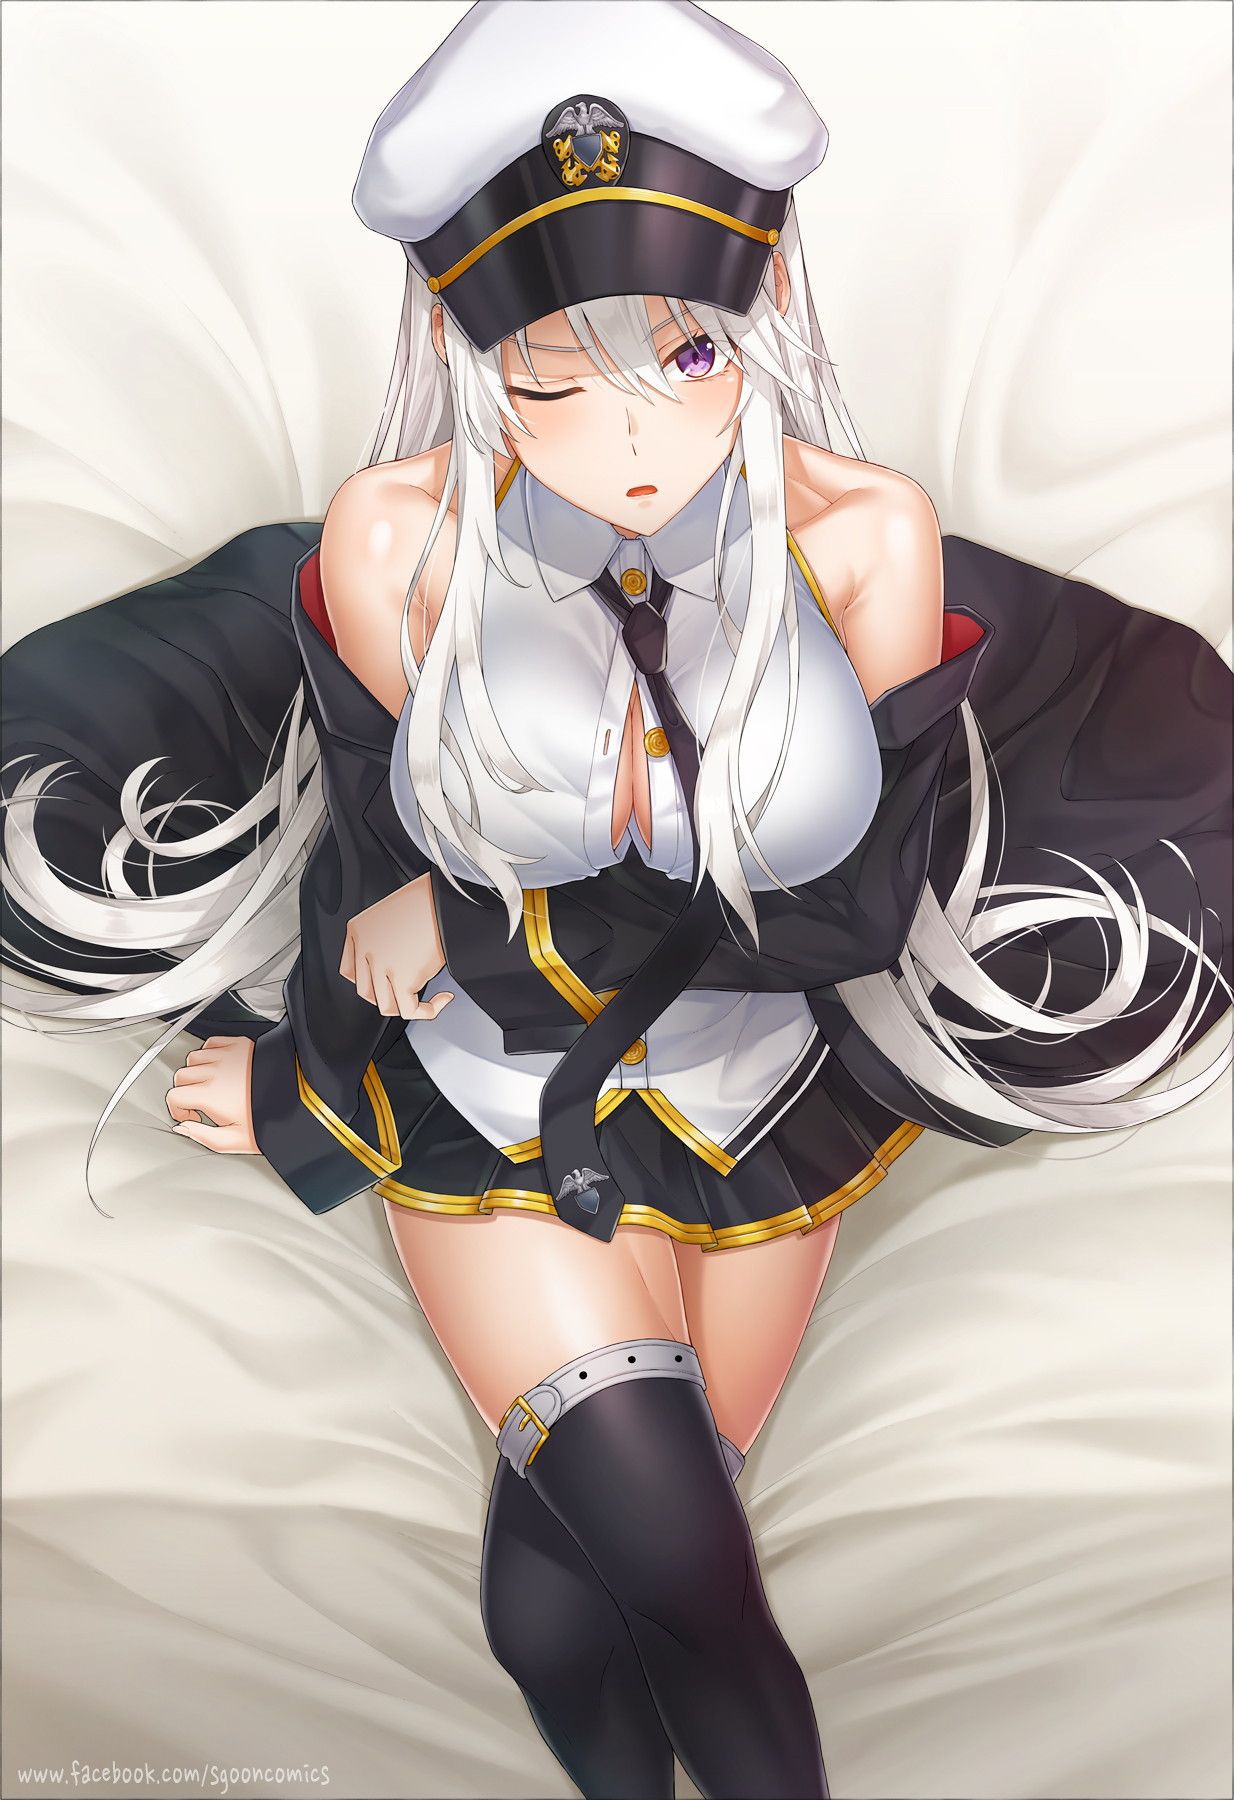 Gather people who want to see the erotic images of Azur Lane! 2